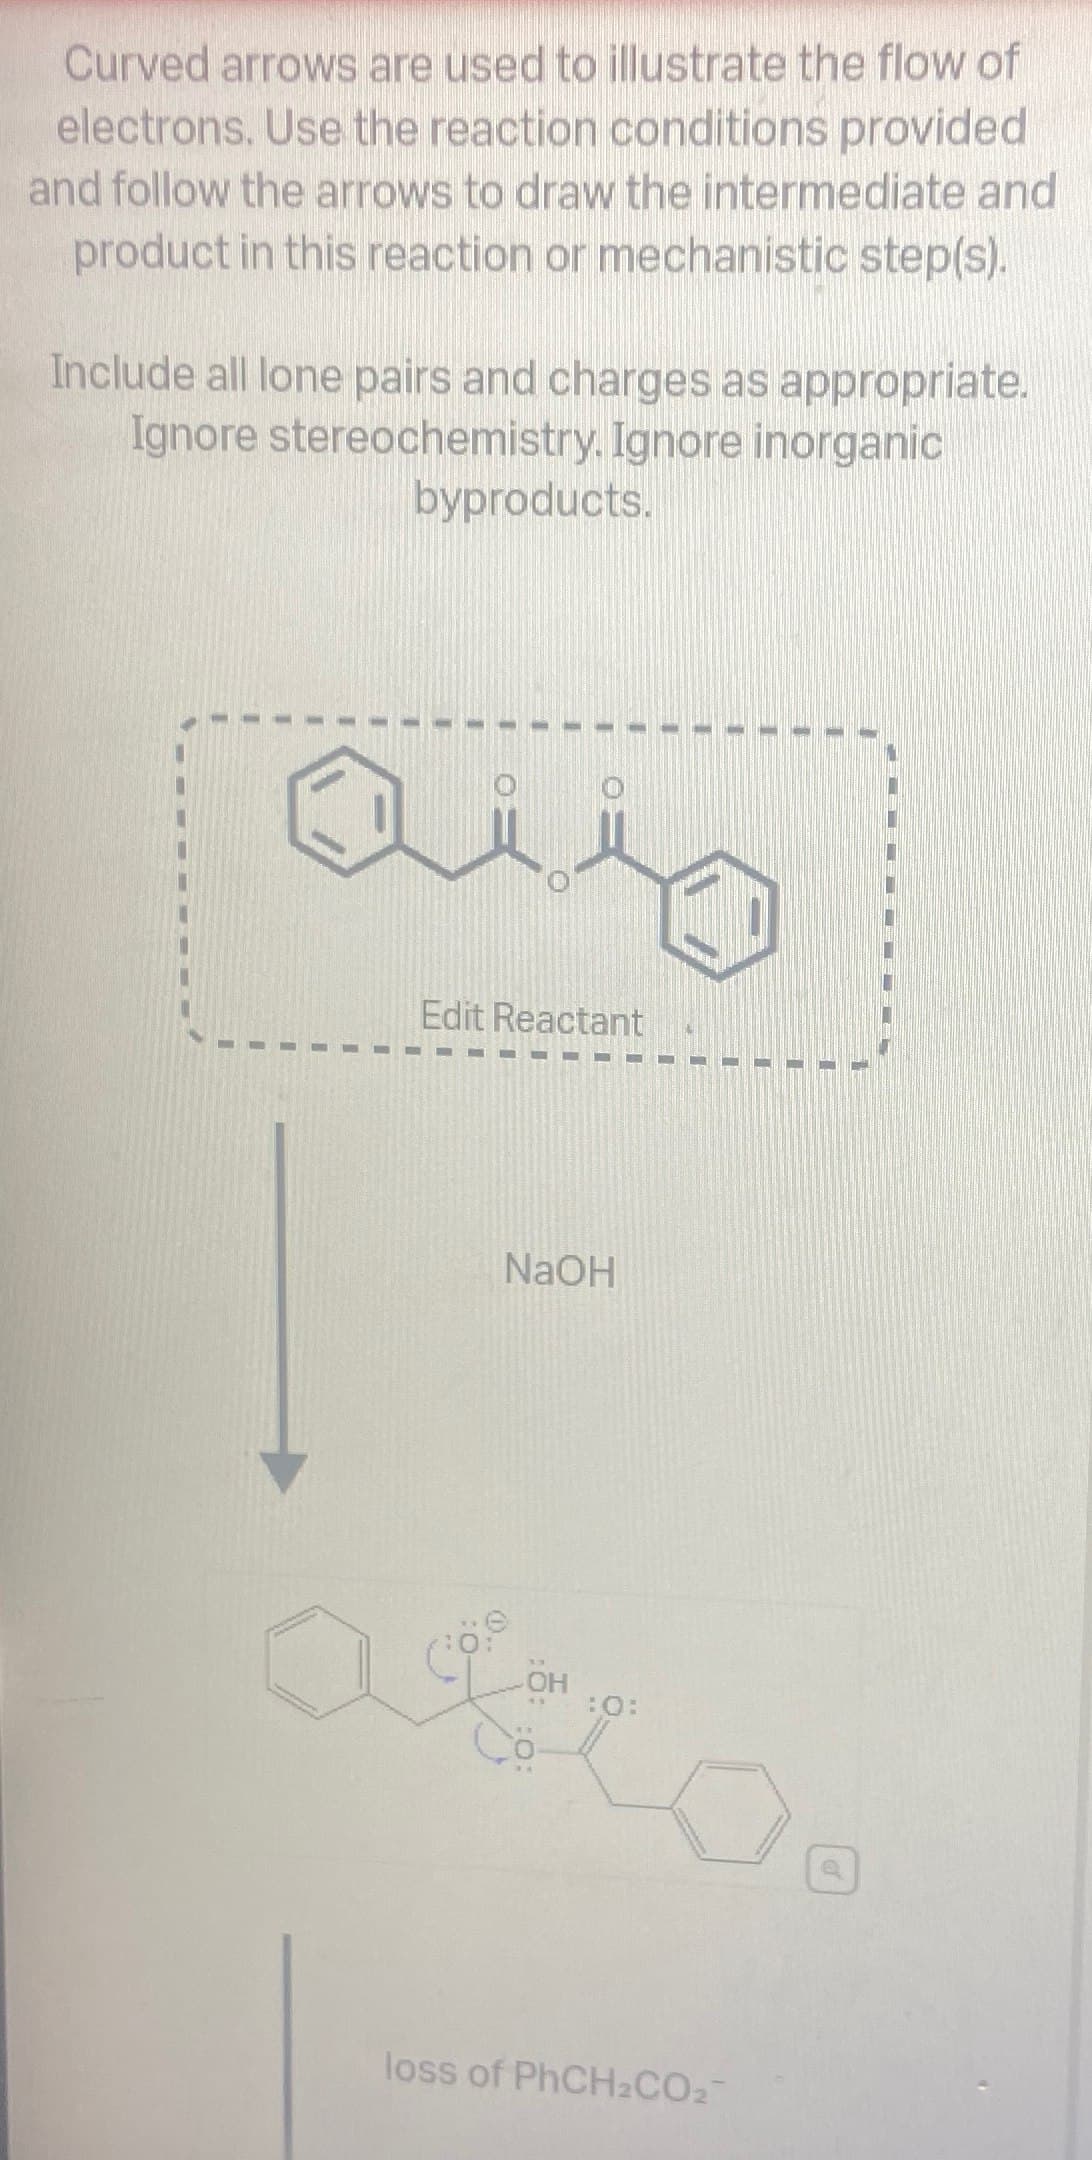 Curved arrows are used to illustrate the flow of
electrons. Use the reaction conditions provided
and follow the arrows to draw the intermediate and
product in this reaction or mechanistic step(s).
Include all lone pairs and charges as appropriate.
Ignore stereochemistry. Ignore inorganic
byproducts.
aus
Edit Reactant
NaOH
OH
:0:
asco
loss of PhCH2CO2